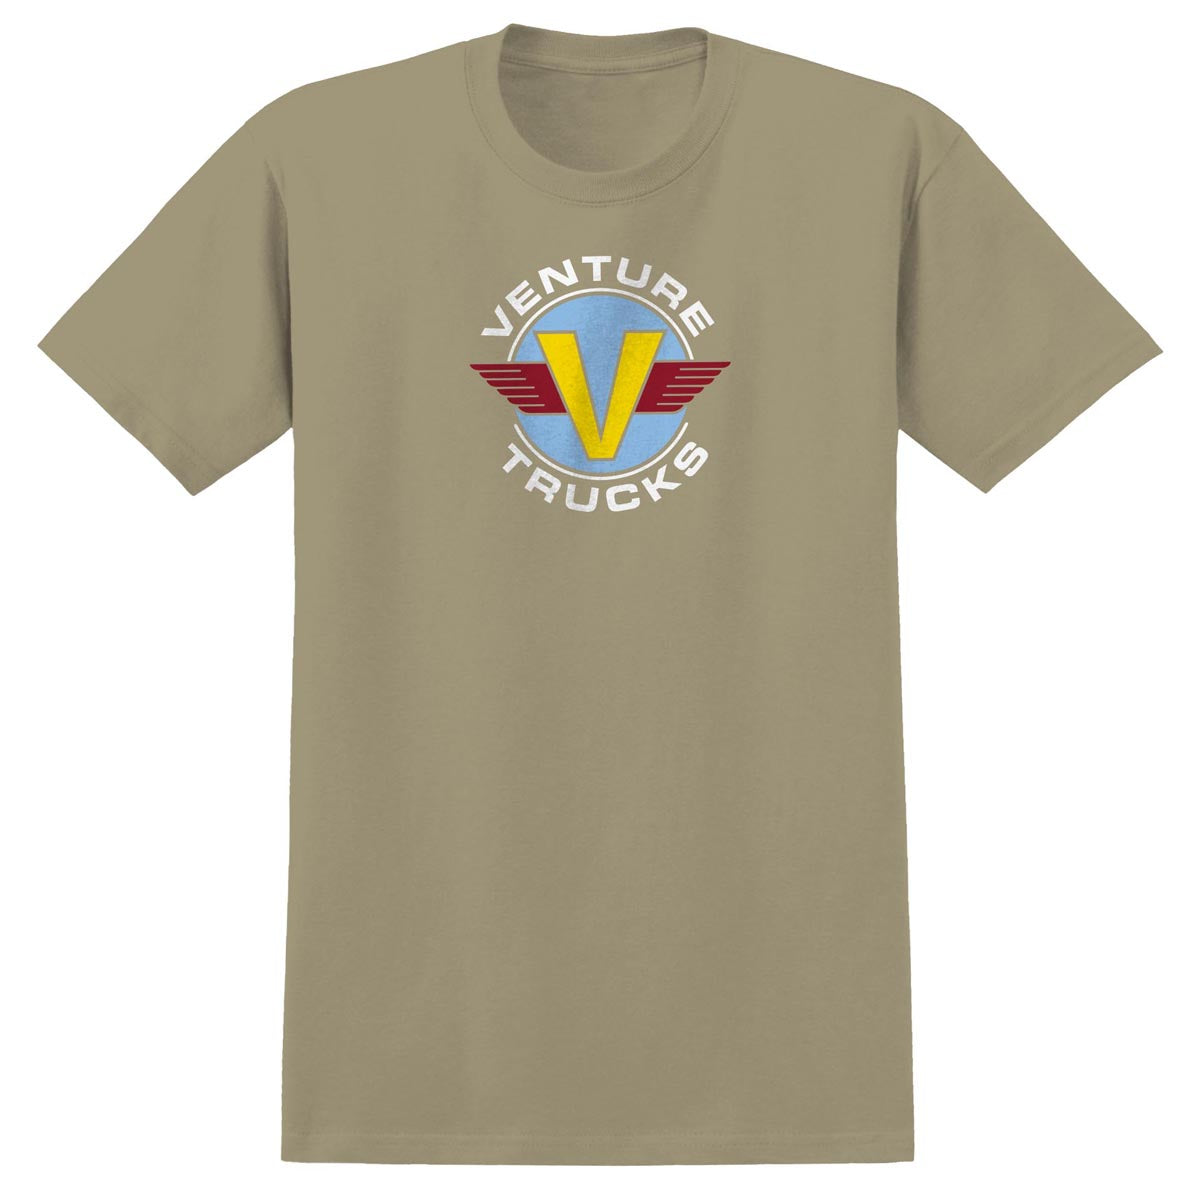 Venture Wings T-Shirt - Sand/Light Blue/Yellow/Dk Red image 1